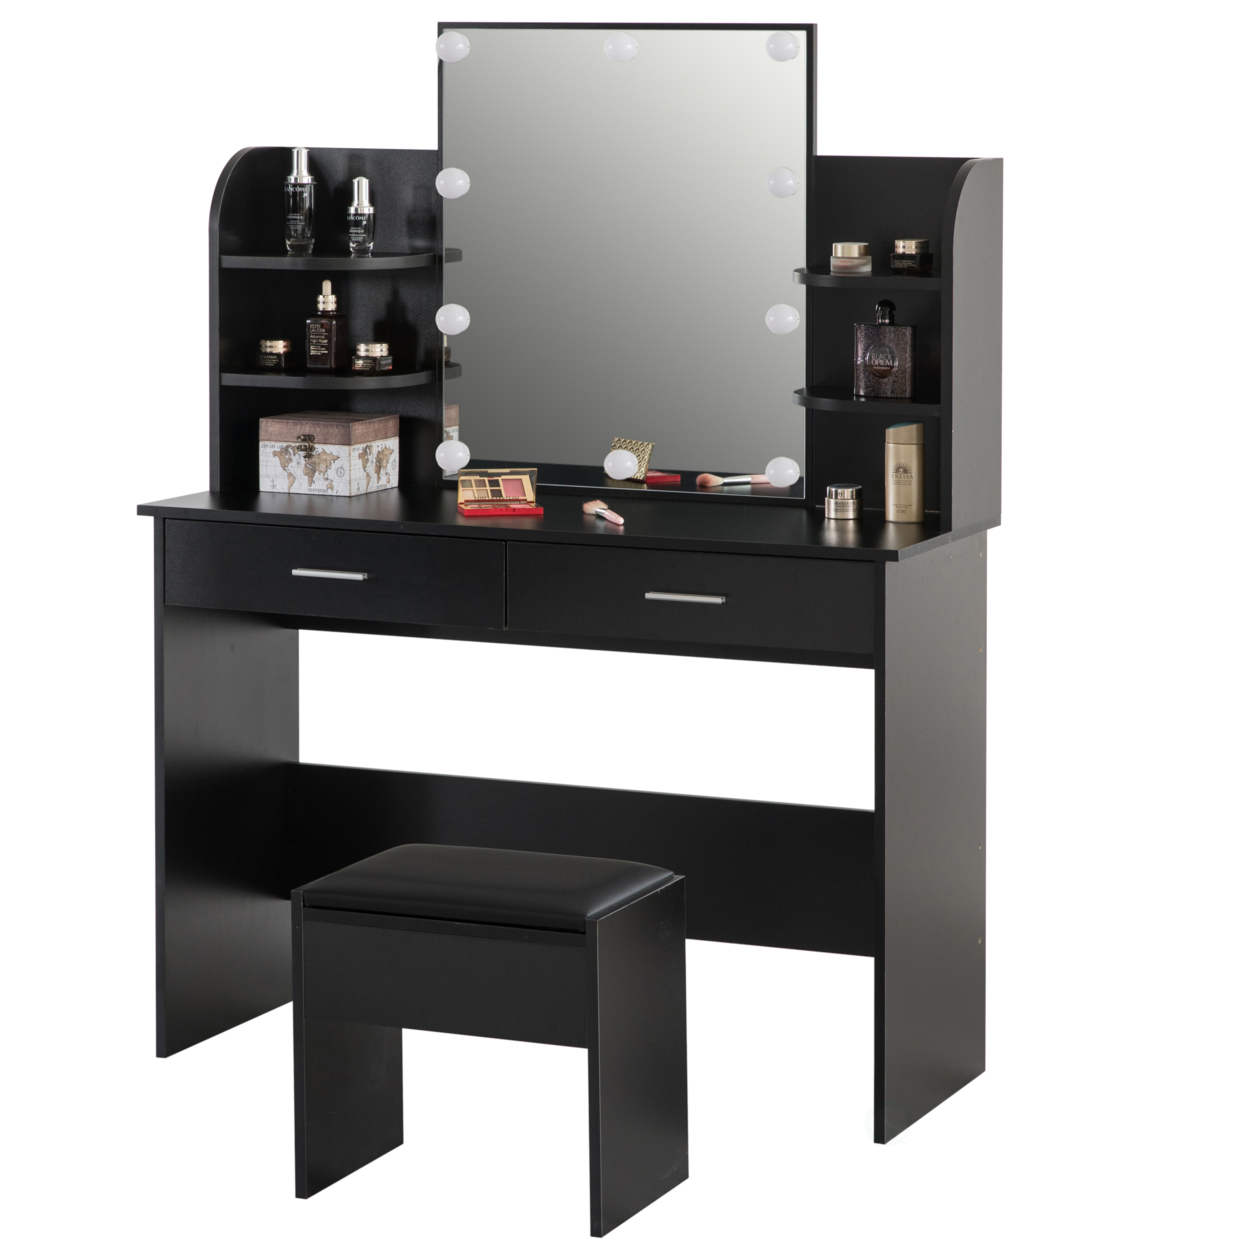 Modern Wooden Vanity Dressing Table With Two Drawers, Led Mirror And Stool - Black